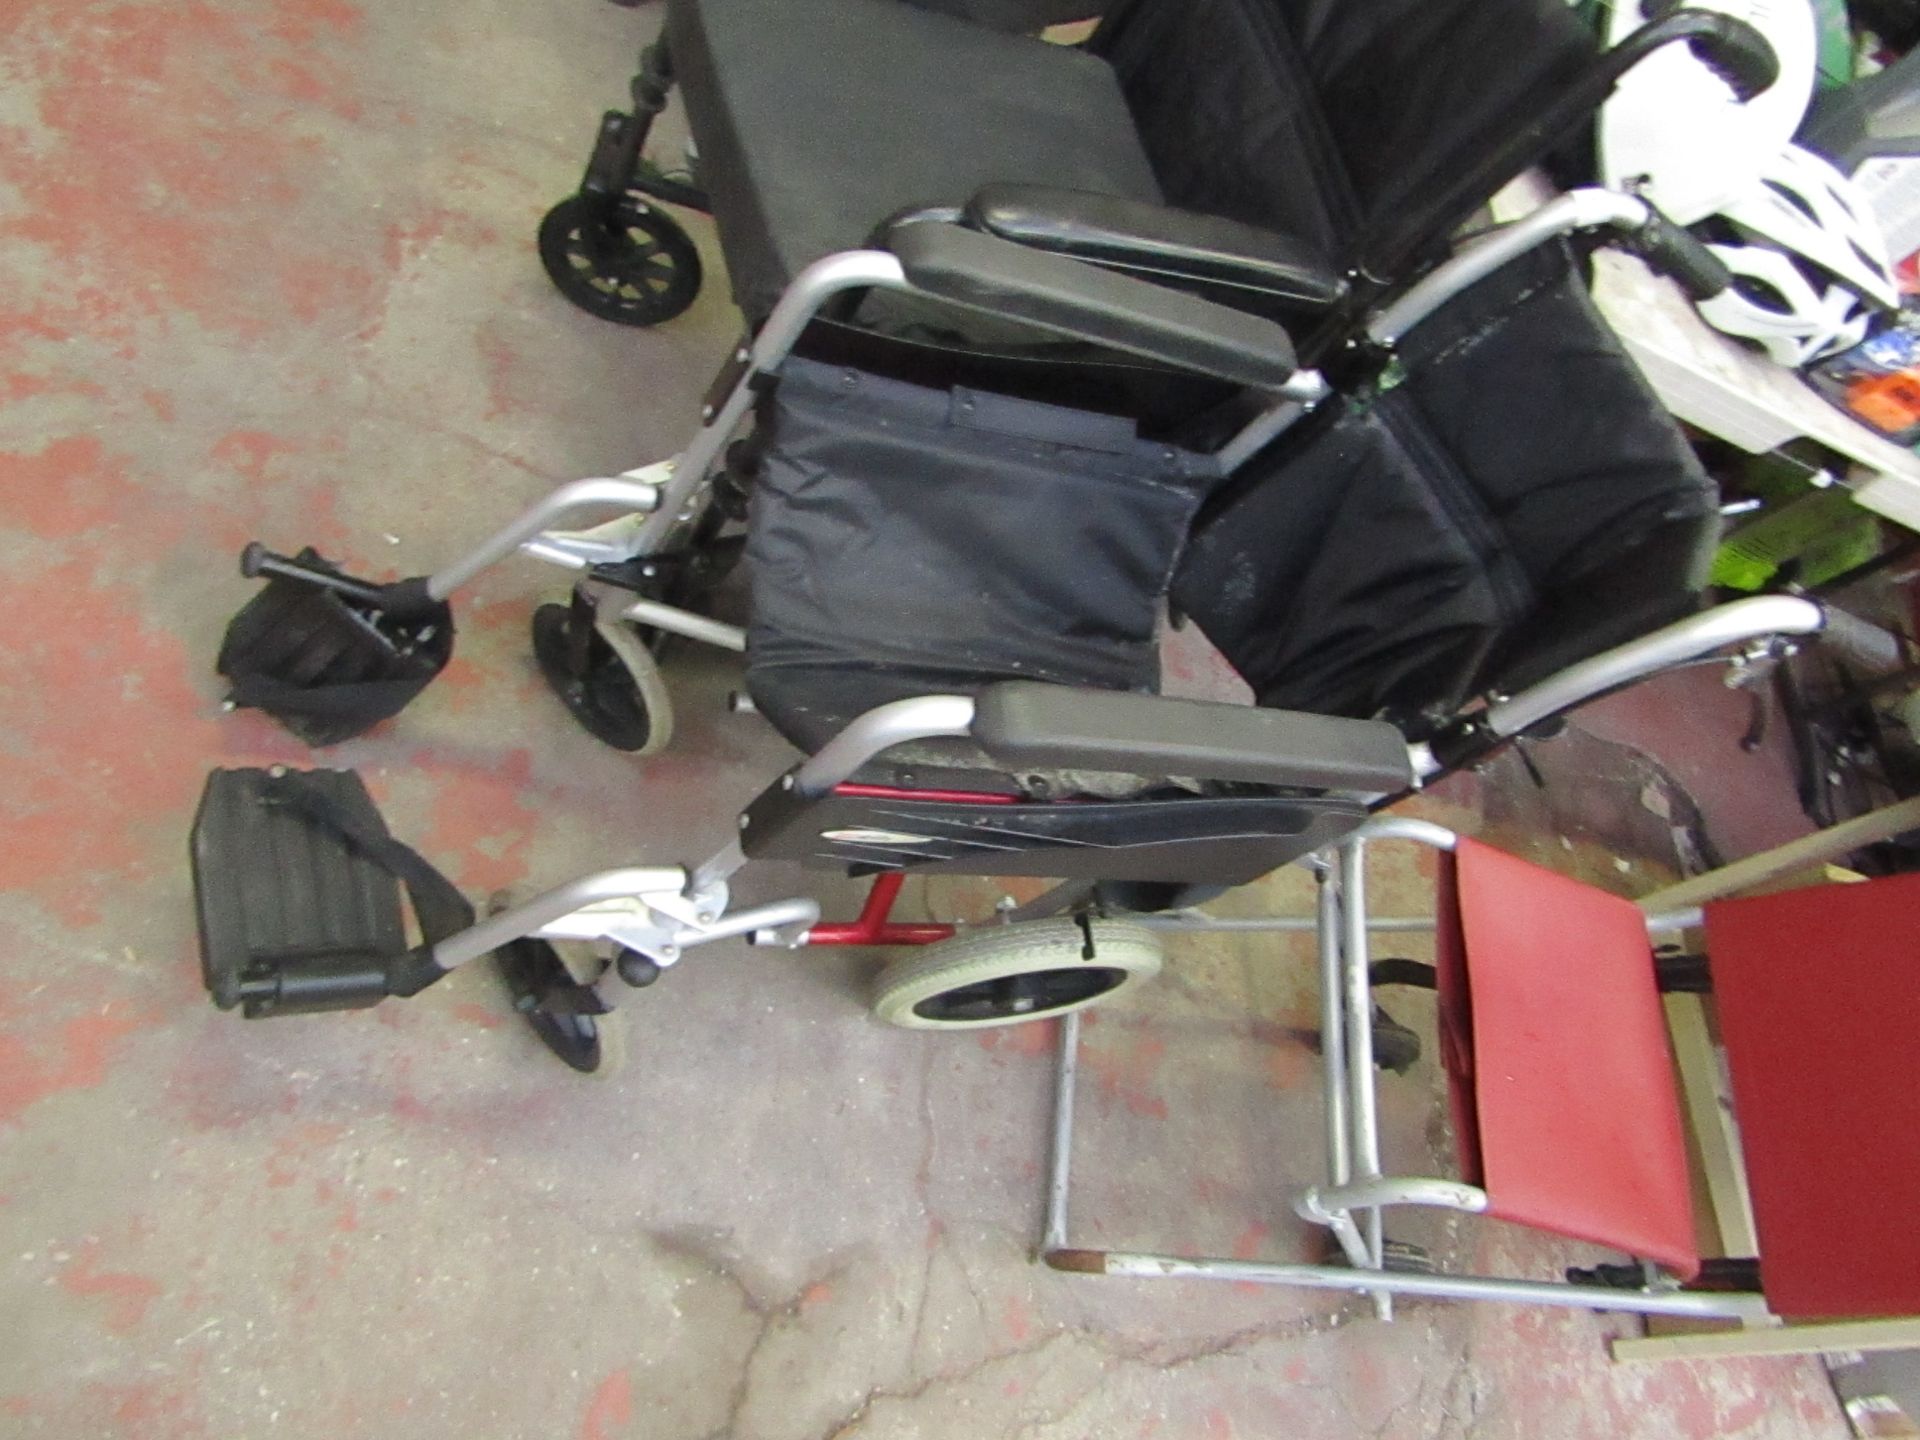 2GO ability Lightweight aluminum Wheelchair,condition used & Foot peddle broke, RRP £75